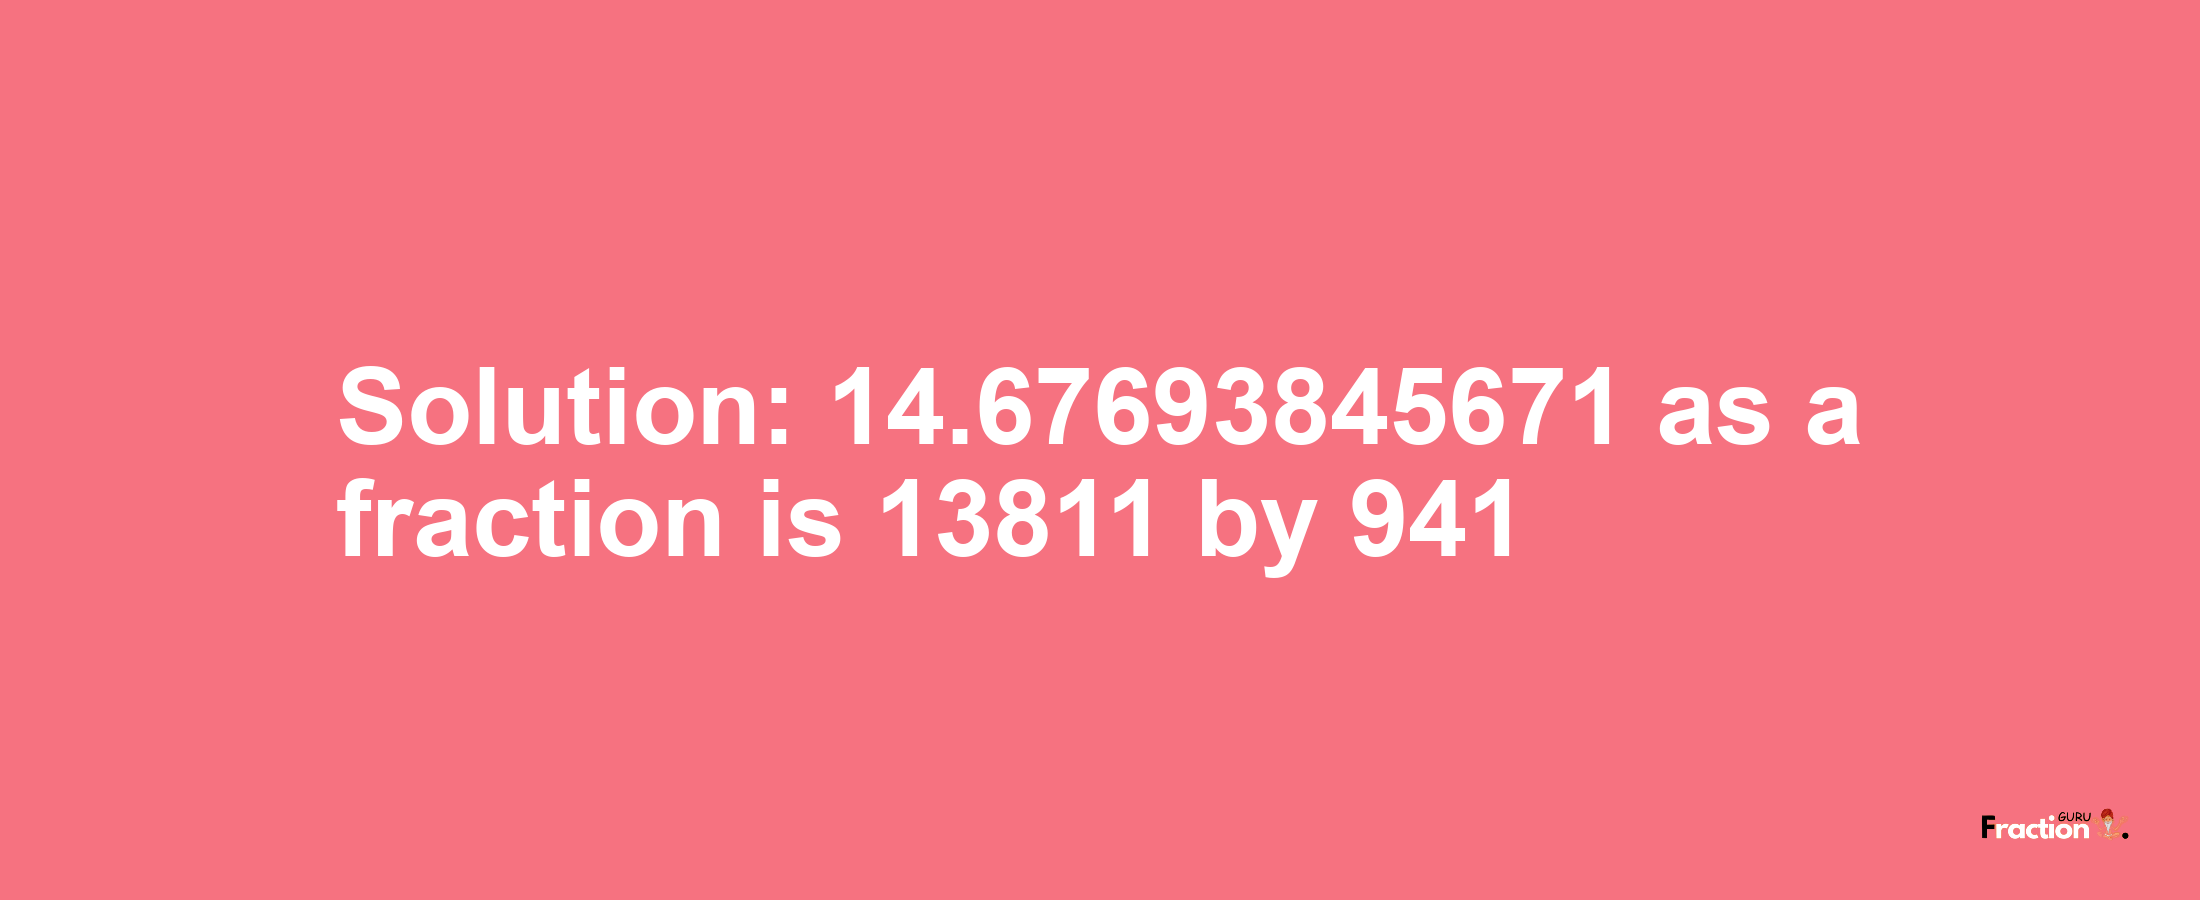 Solution:14.67693845671 as a fraction is 13811/941